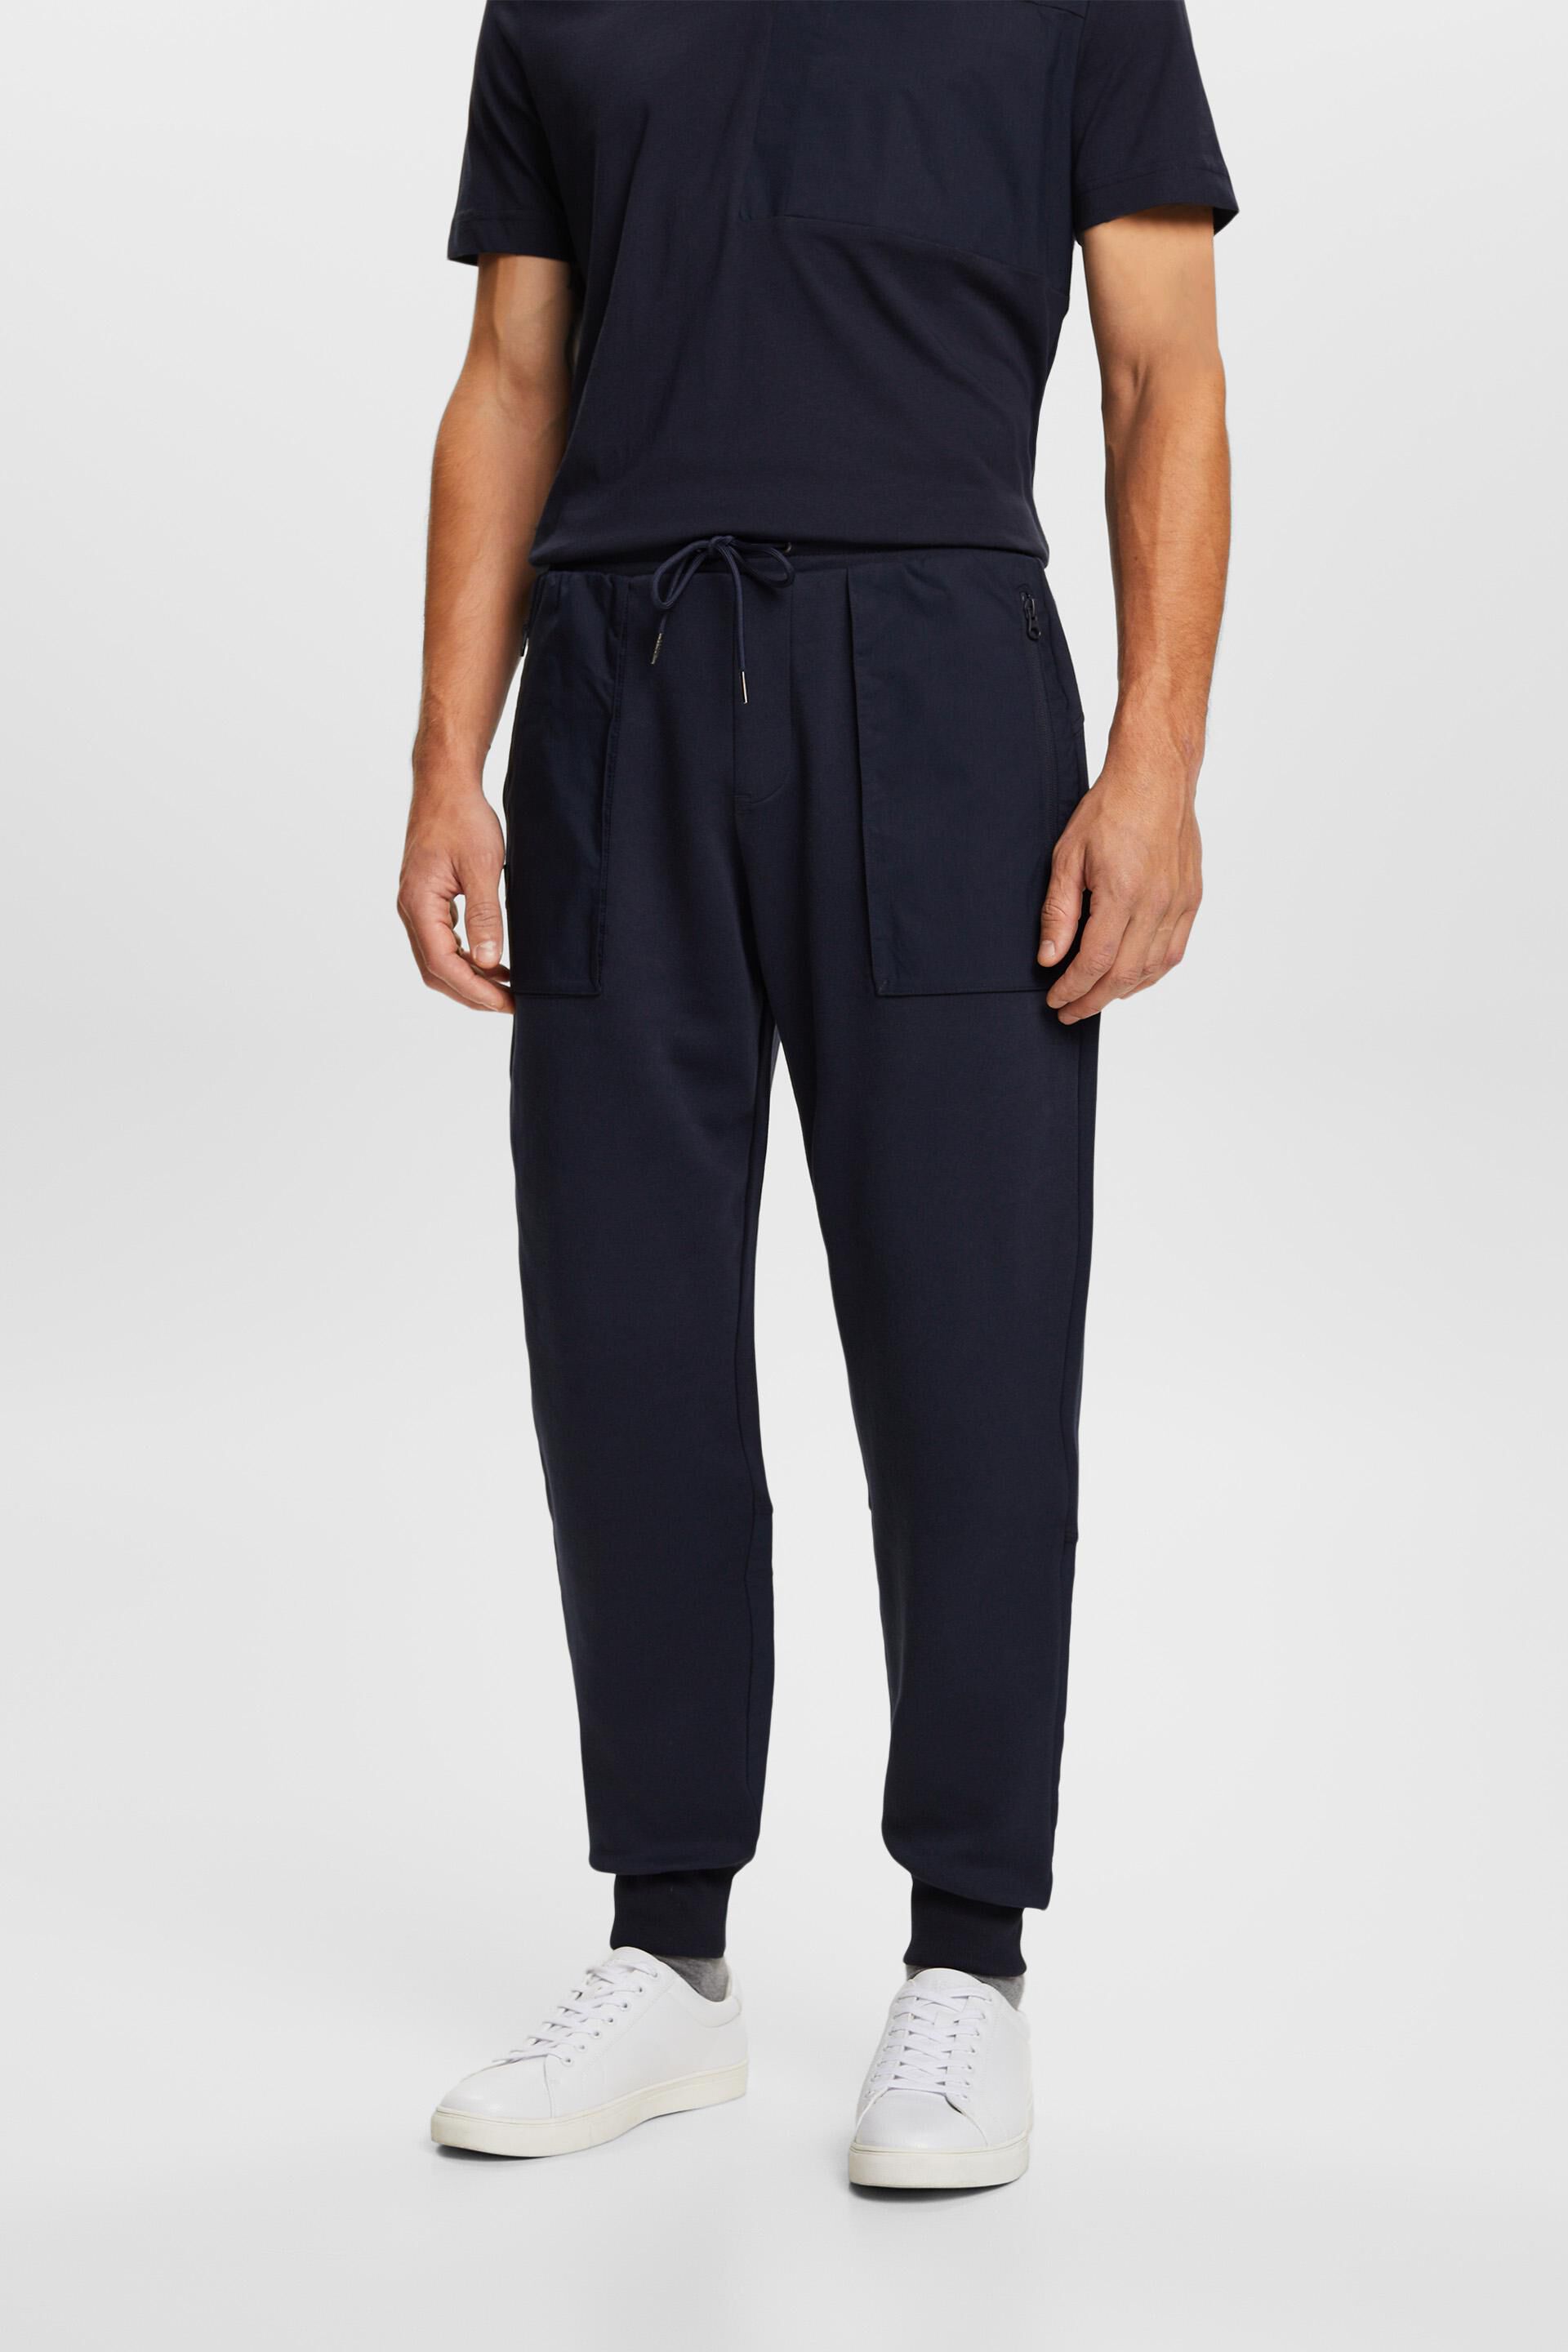 Esprit Fashion material joggers mixed in